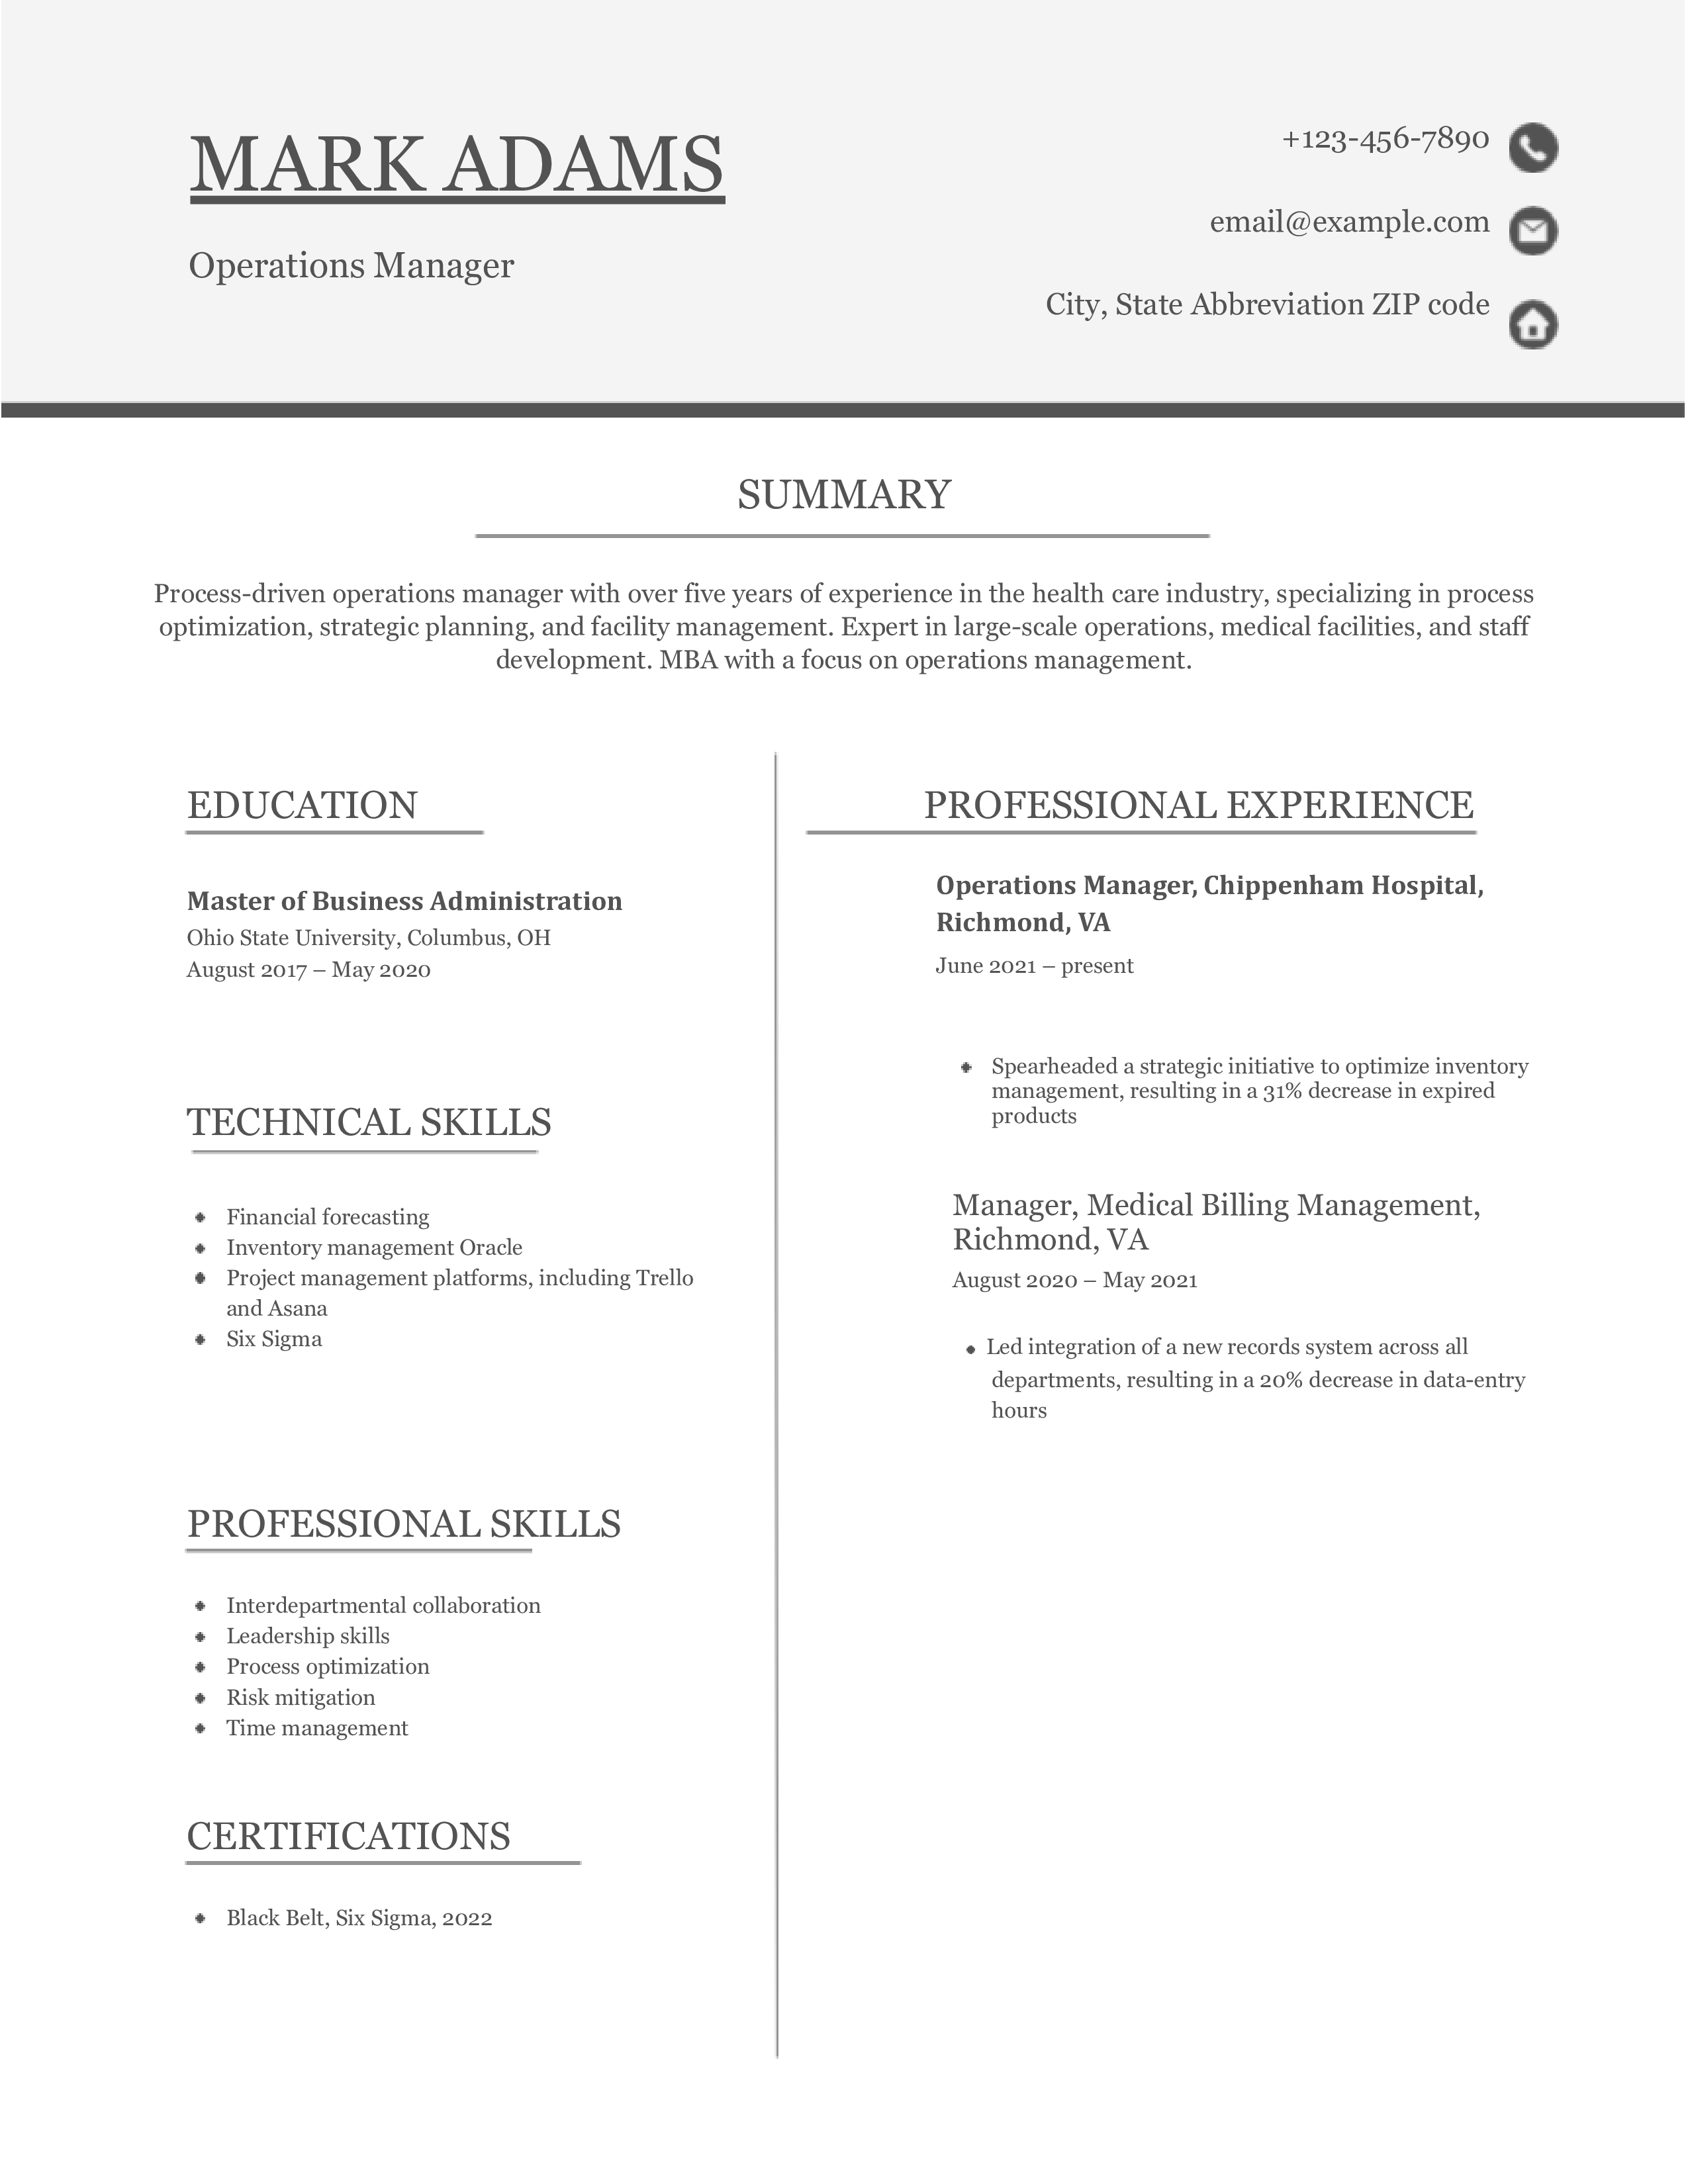 Hybrid Resume Templates and Examples